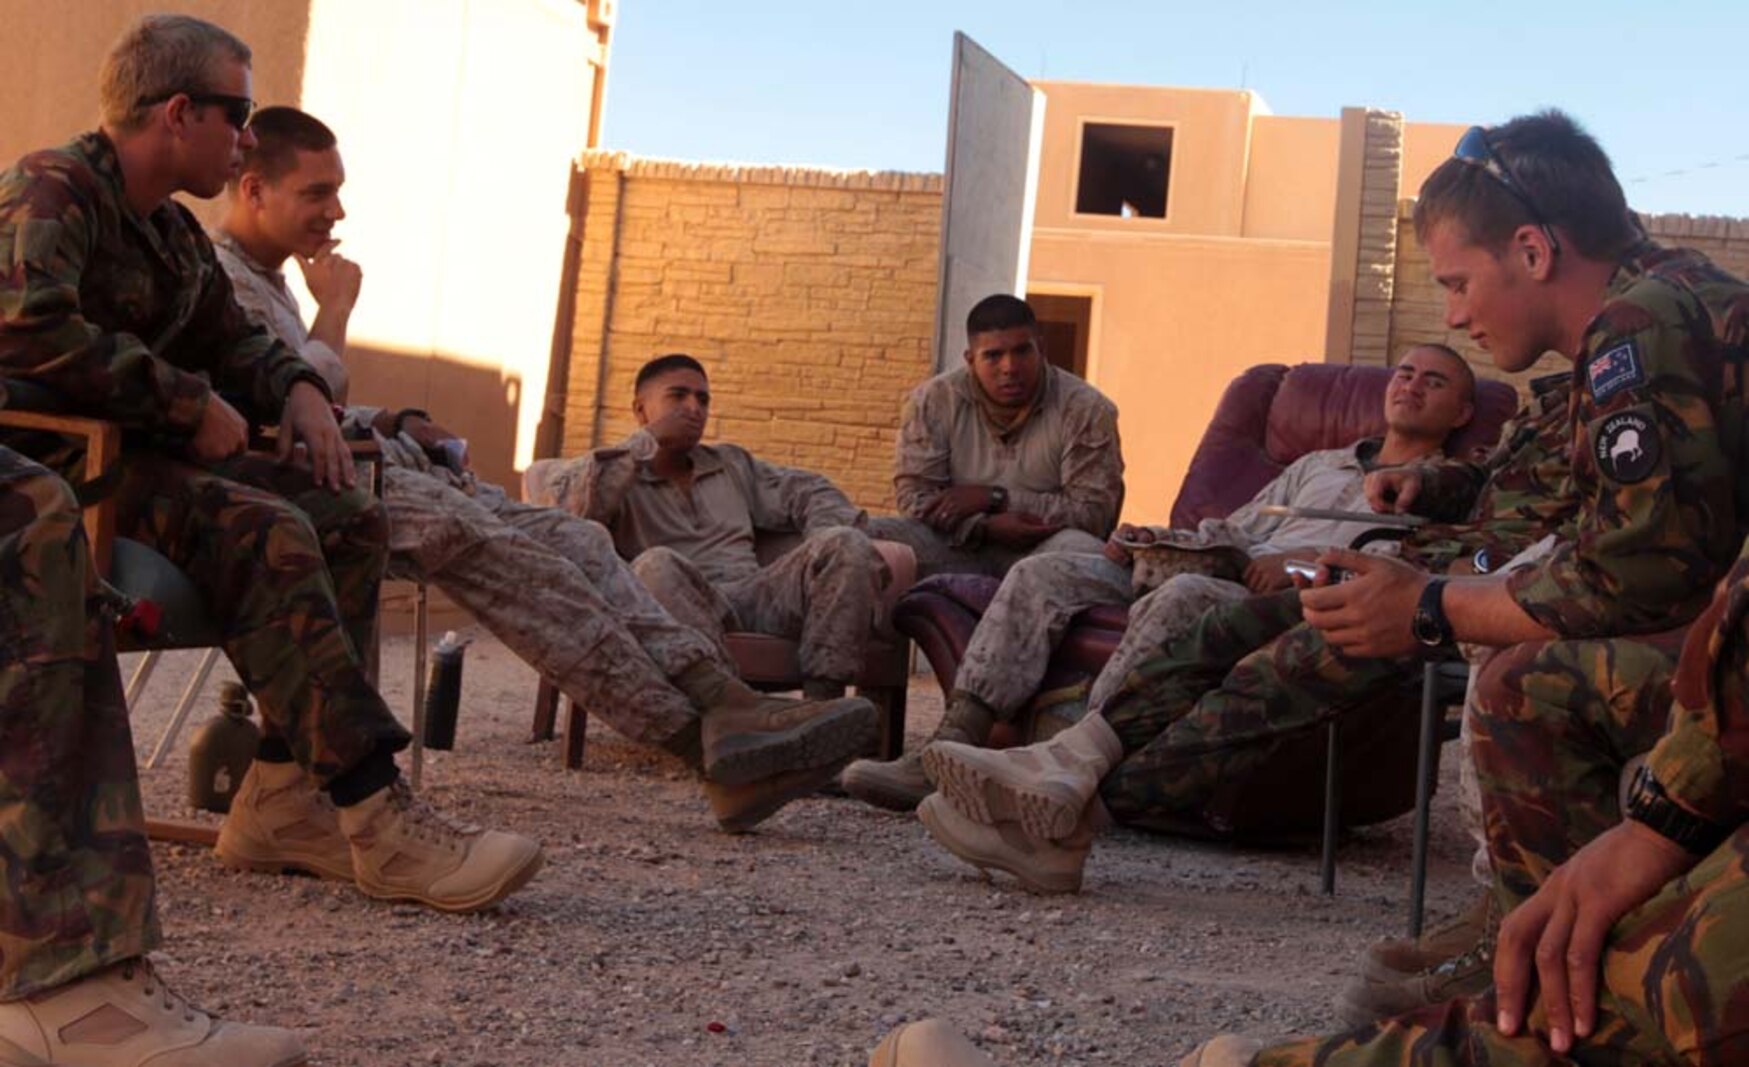 Marines and New Zealand Army soldiers, also known as Kiwis, sit in a circle on worn-out couches, chairs and benches as they wait for their next scenario in their counter insurgency exercise at Range 220A, June 20. The Marines and Kiwis made strong bonds during their down time as they found out just how much they had in common.